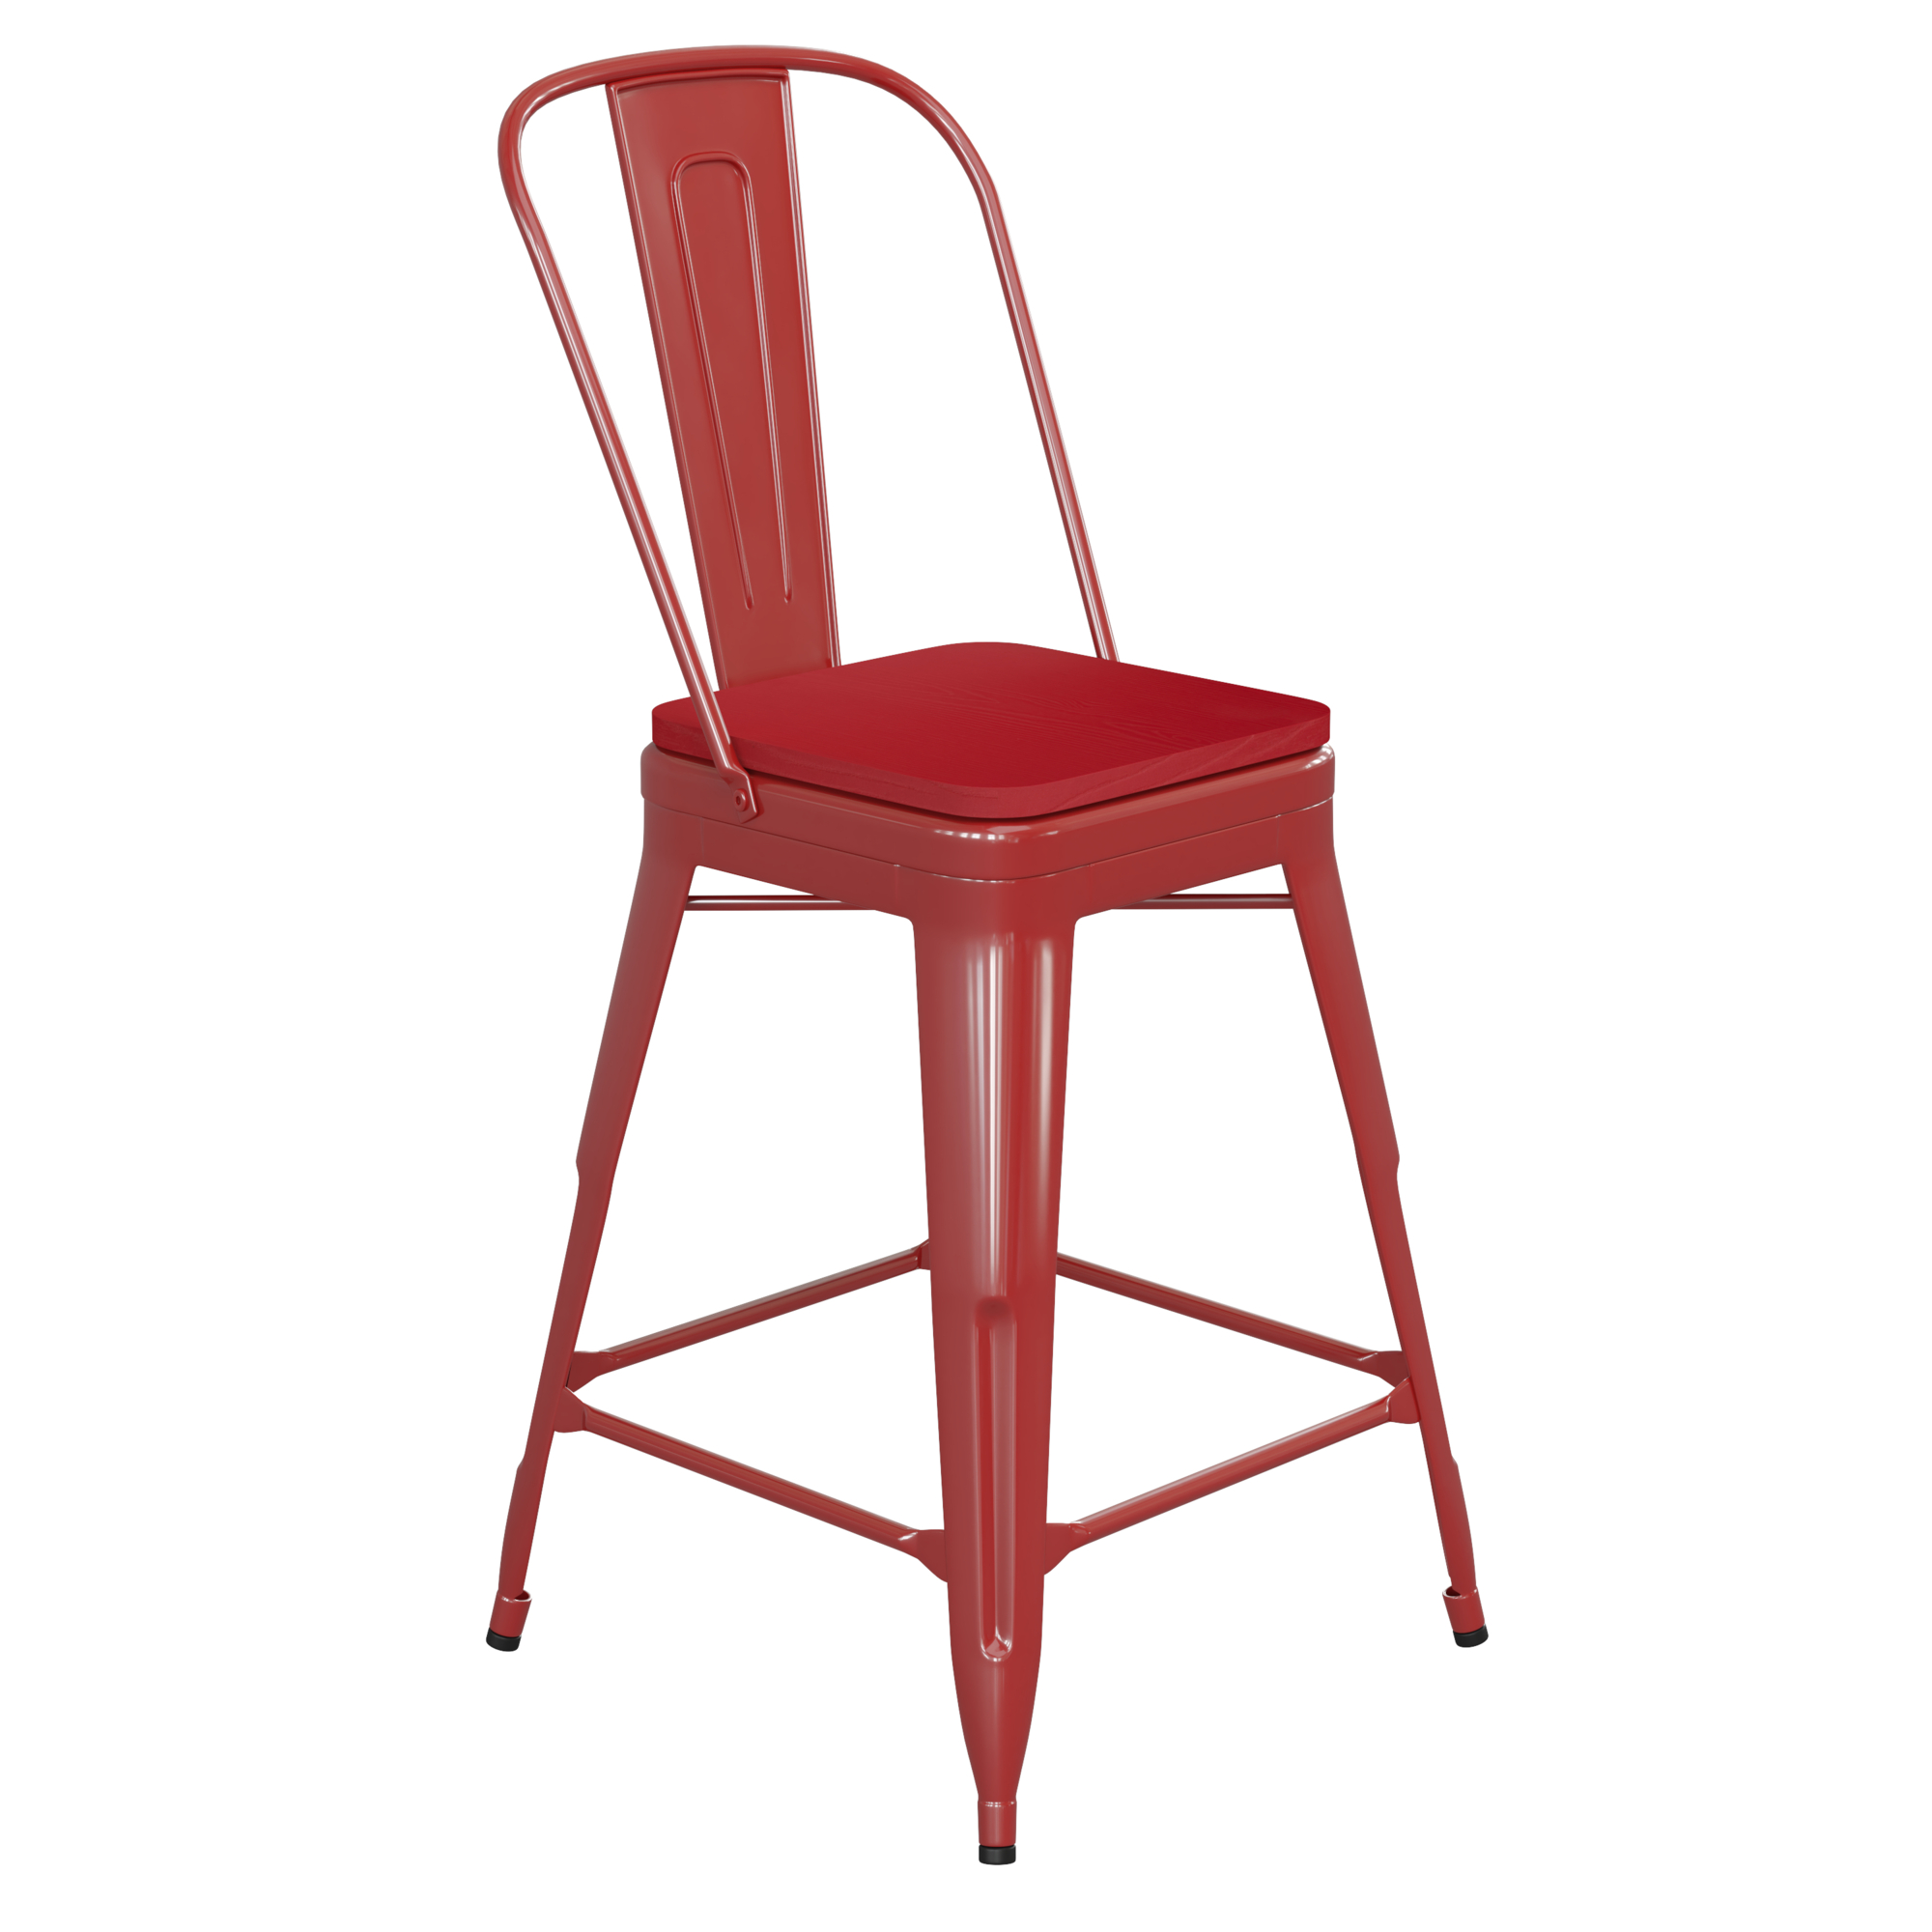 Flash Furniture, 24Inch Red Metal Counter Stool-Red Poly Seat, Primary Color Red, Included (qty.) 1, Model CH3132024GBRP2R